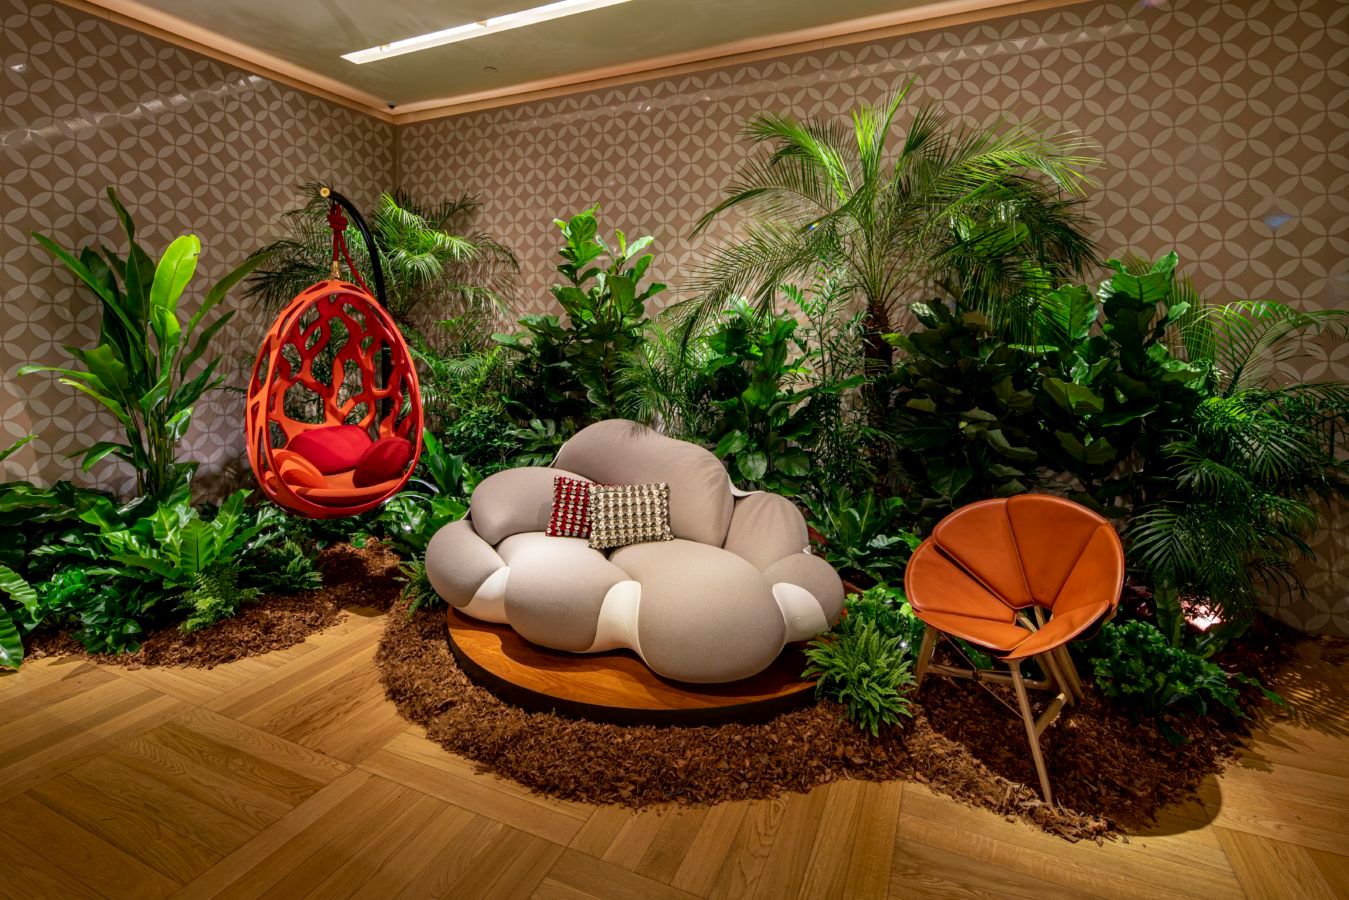 Discover Louis Vuitton's Latest Objets Nomades Collection In Hong